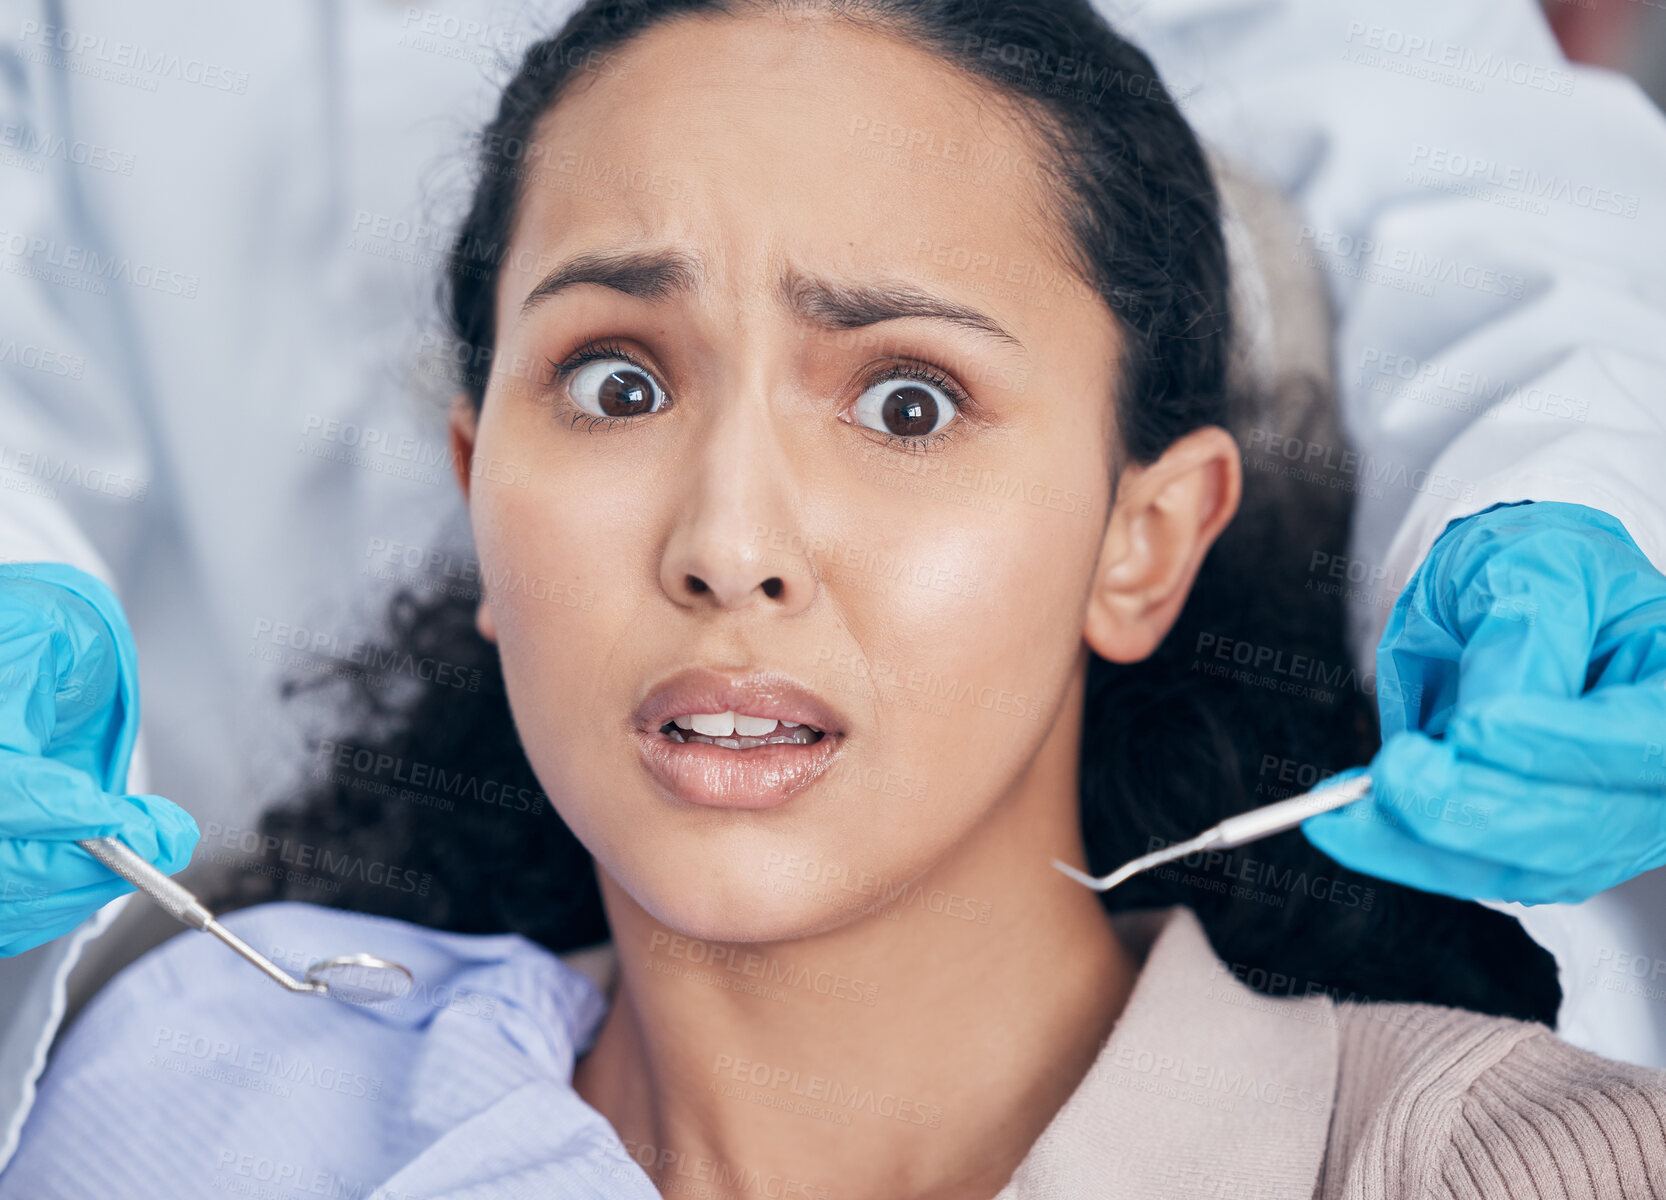 Buy stock photo Shot of a young woman looking afraid at her dentists office